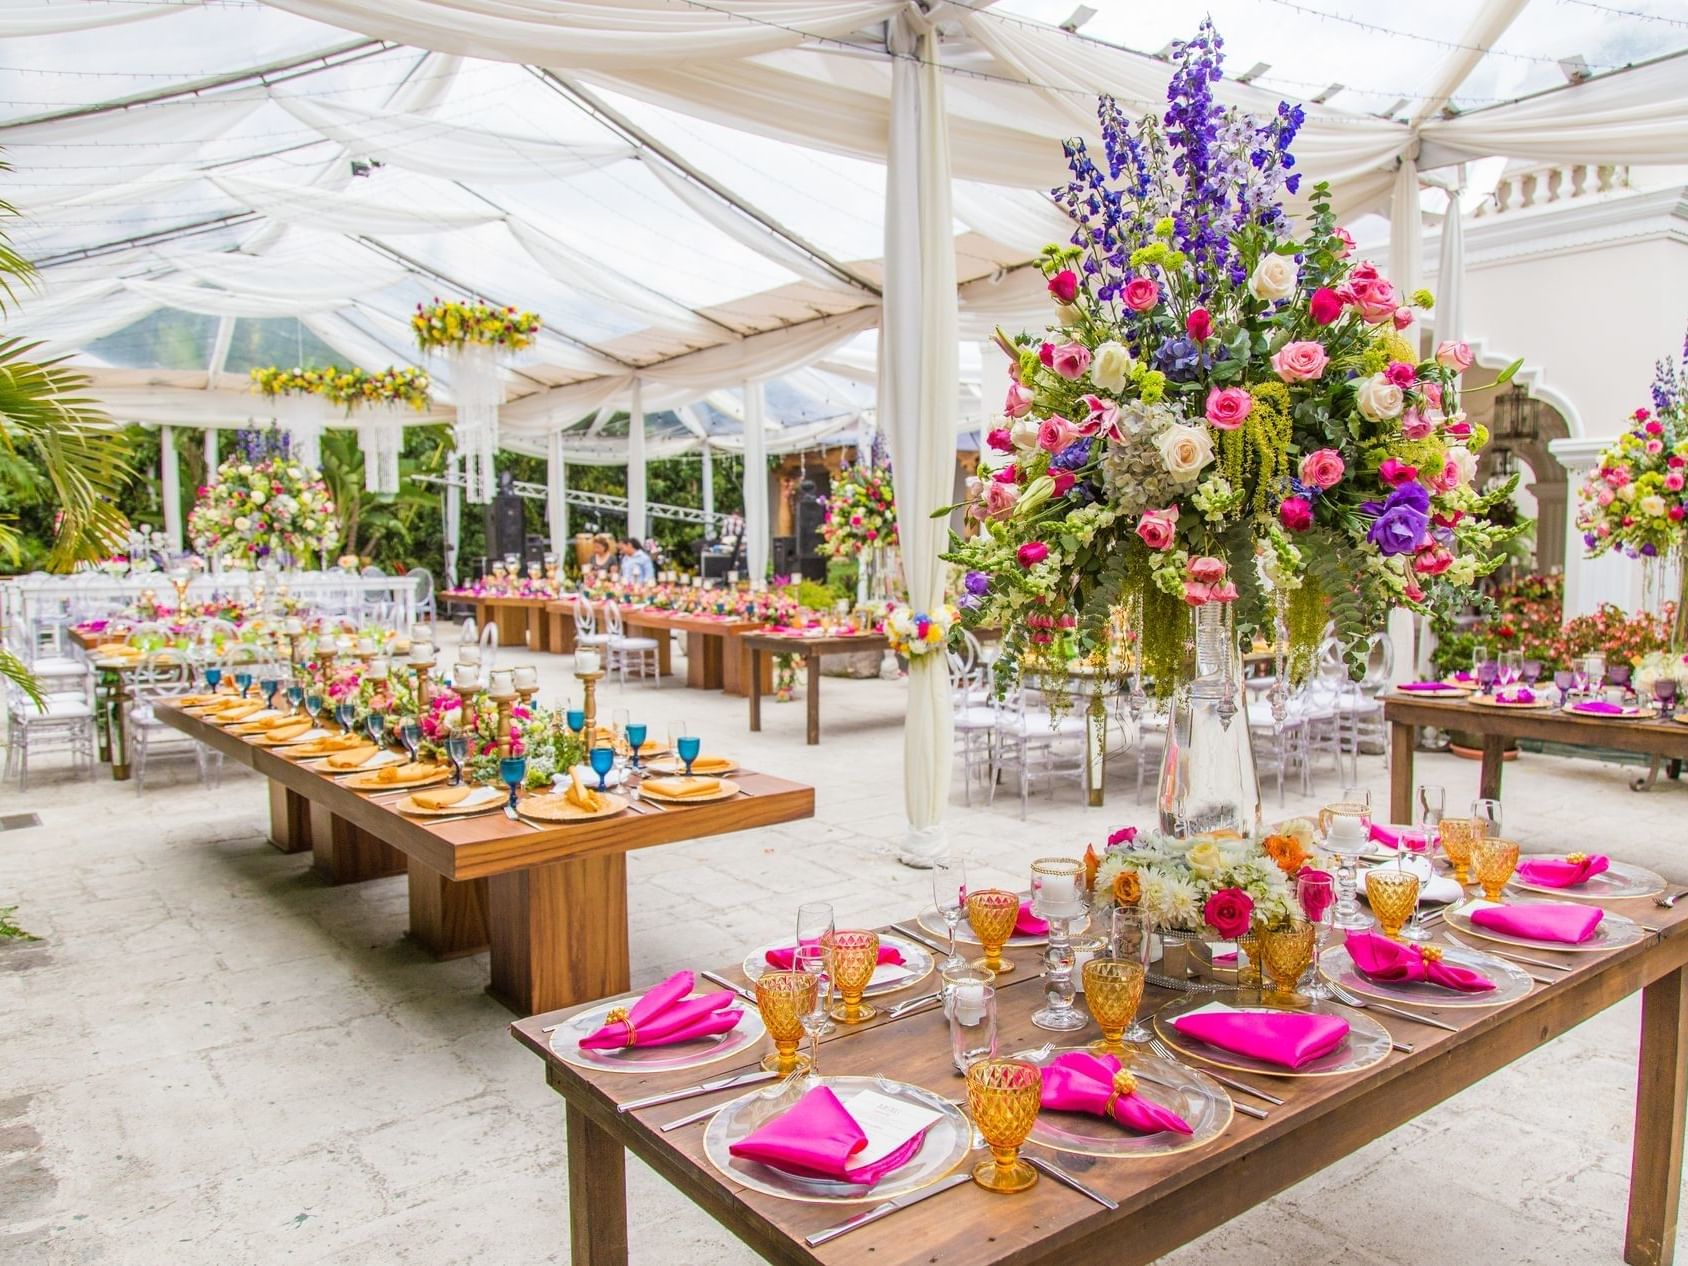 Colorful flowers & tables arranged for an event in La Plazuela at Pensativo House Hotel